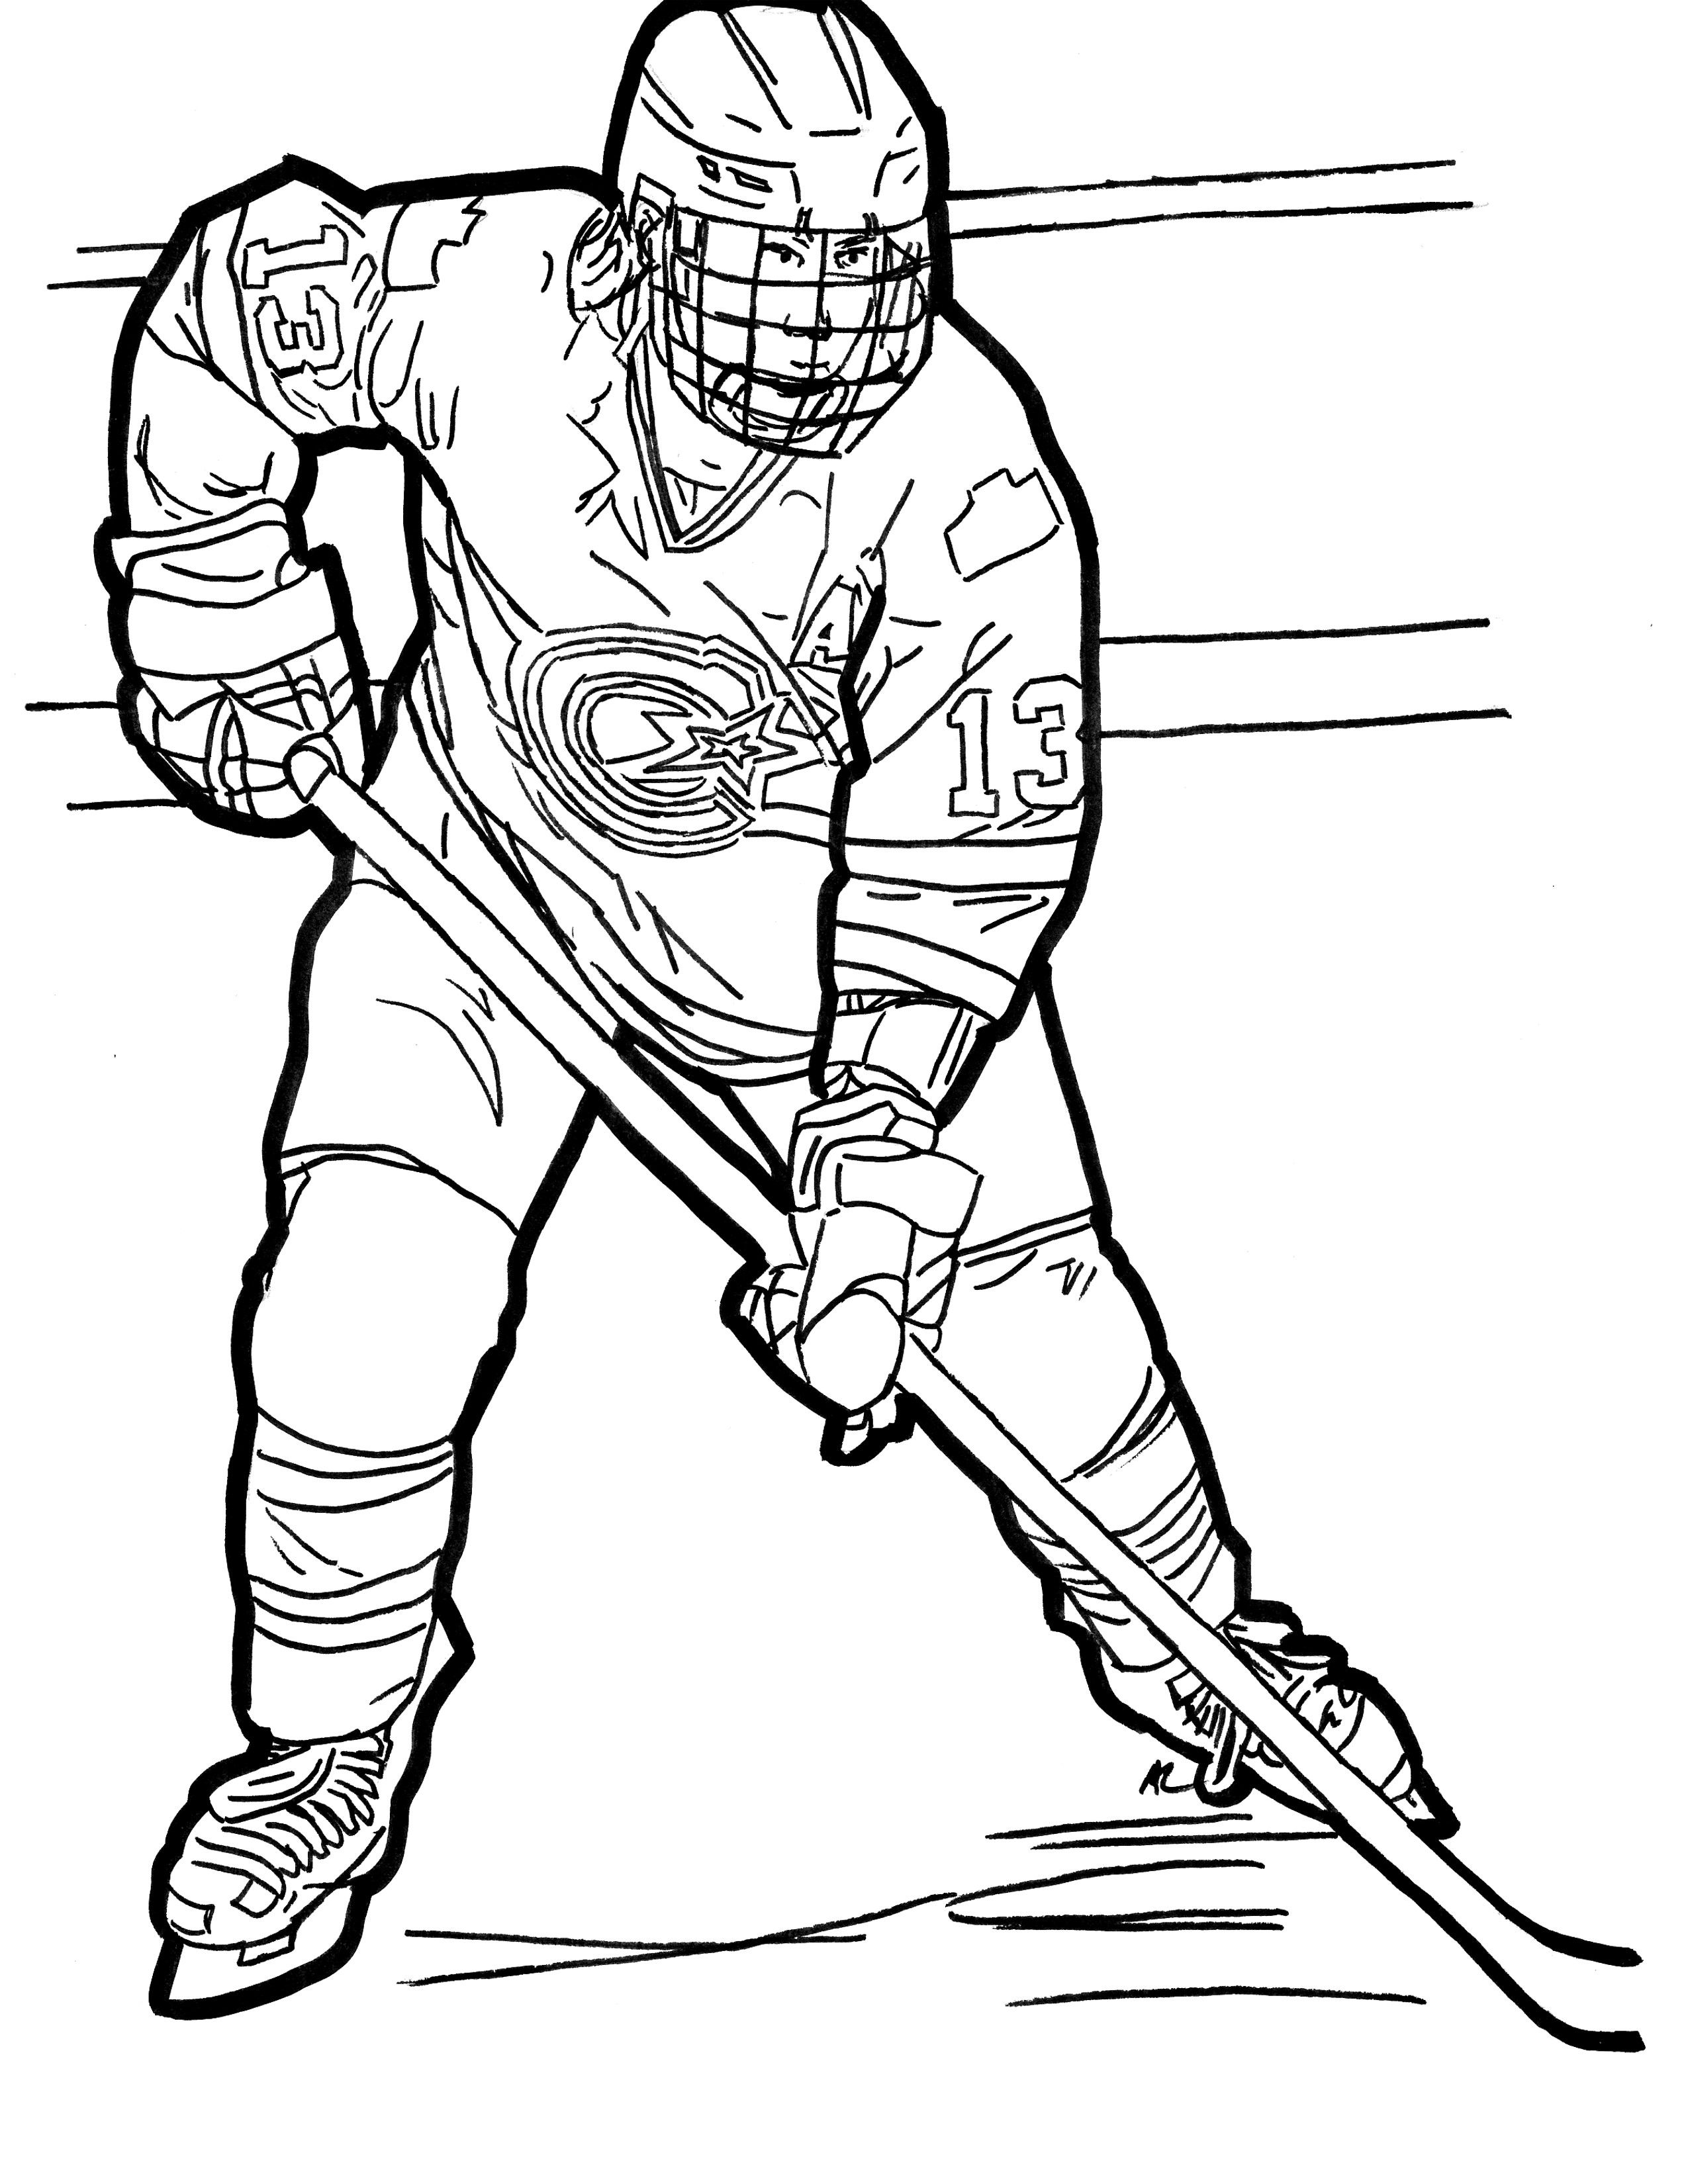 Free Ice Hockey Coloring Pages Pdf - Coloringfolder.com | Ice hockey,  Sports coloring pages, Hockey